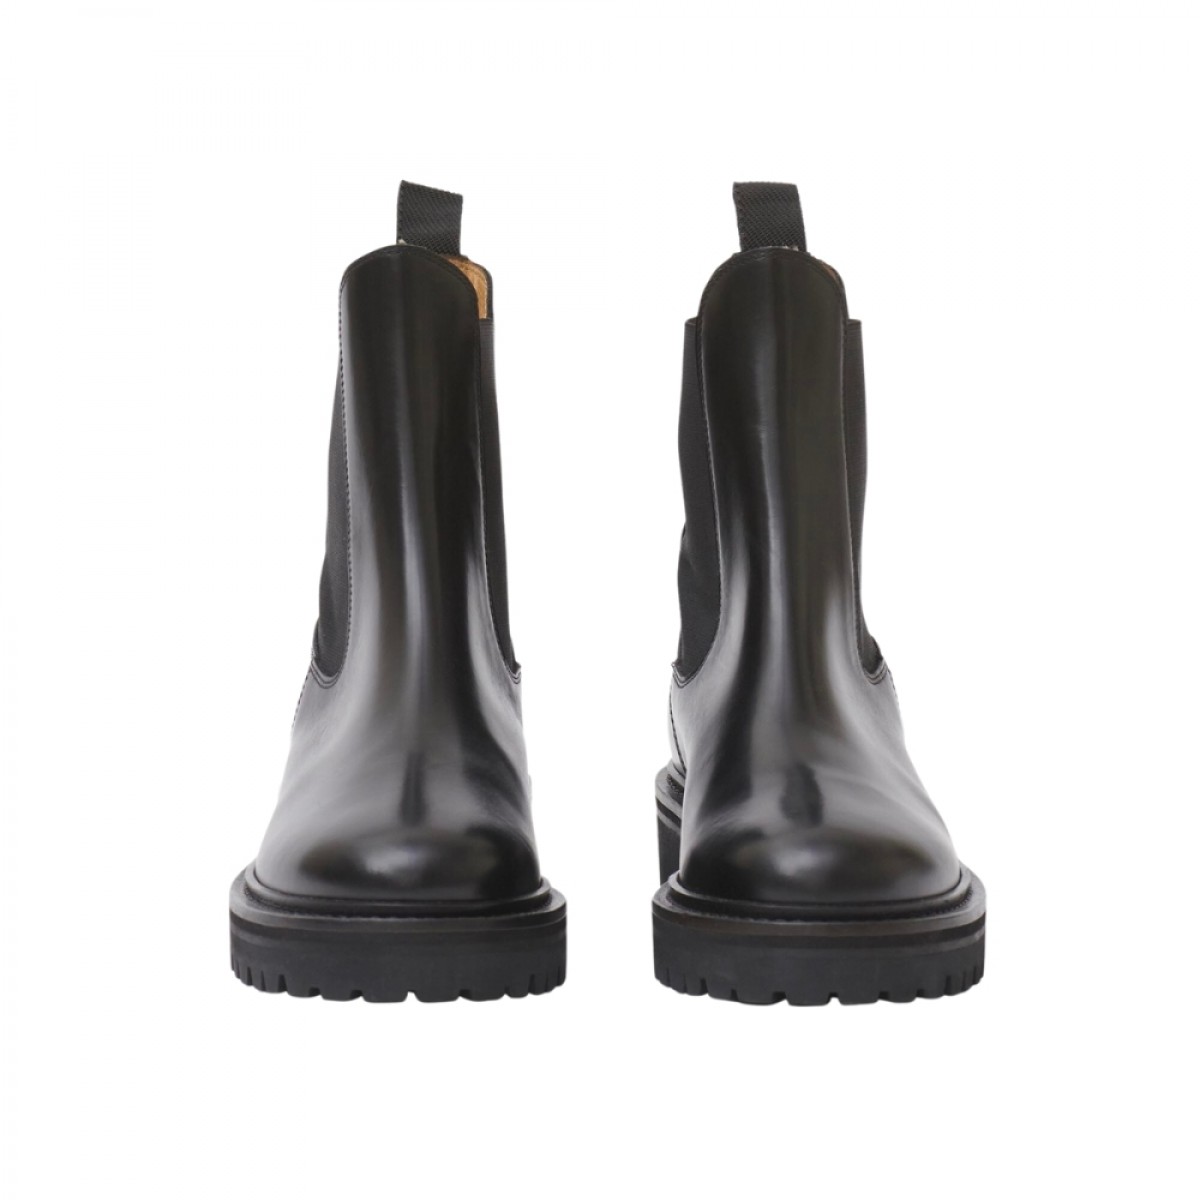 castay chelsea boots - black - front